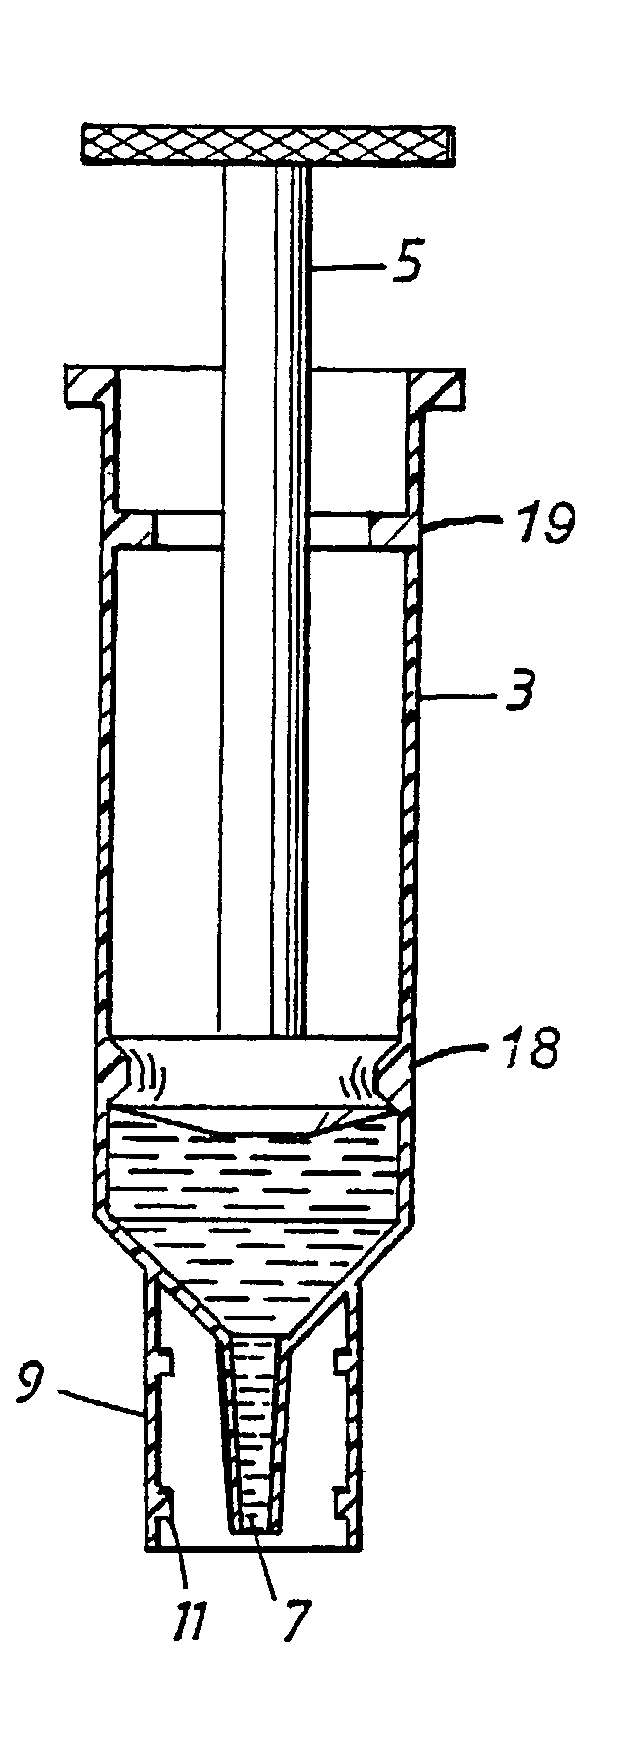 Method and device for the handling of samples and reagents